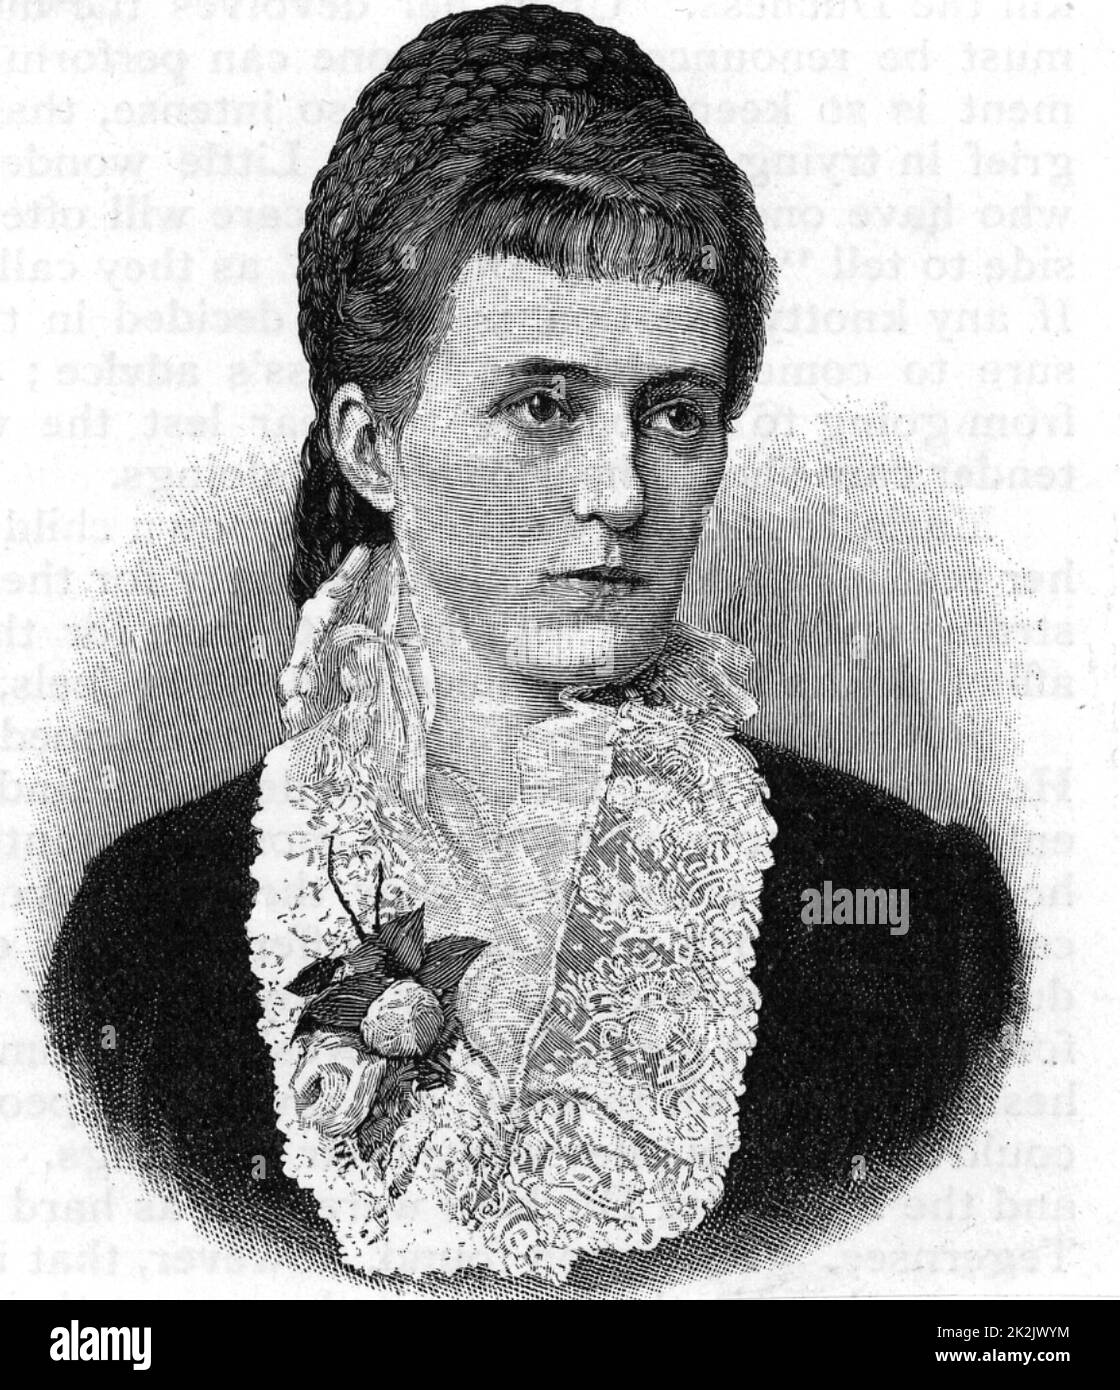 Maria Josepha de Braganca, Duchess of Bavaria (1857-1943) who assisted her husband the Duke, an ophthalmologist, in his work, particularly on cataracts, in his hospital at Tegernsee, Bavaria, Germany. From 'The English Illustrated Magazine' (London, 1891). Engraving. Stock Photo